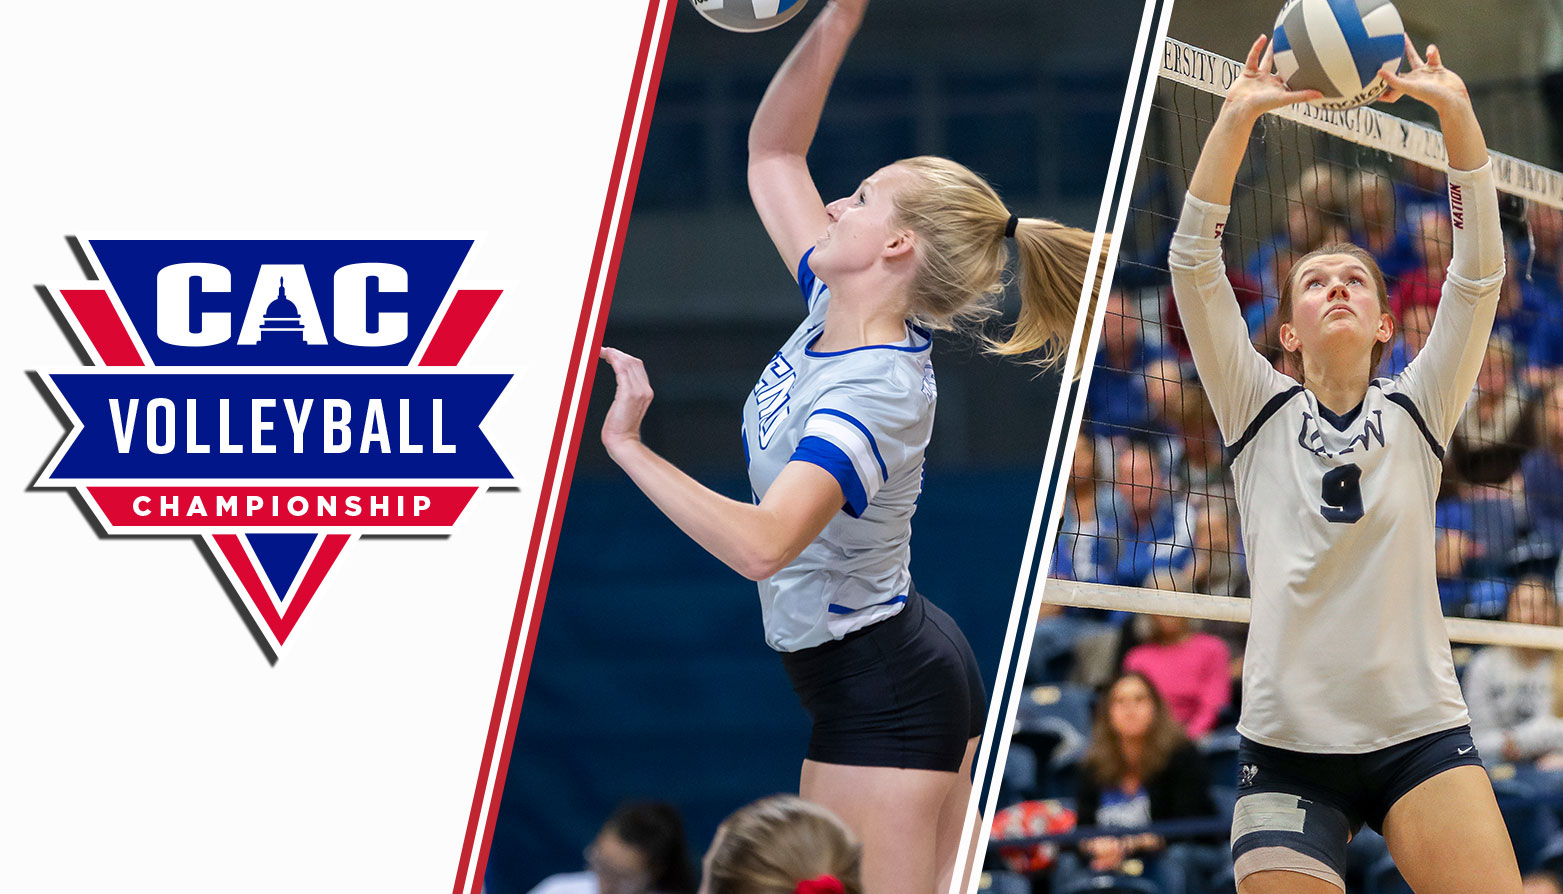 CNU Clinches Top Seed in CAC Volleyball Tournament; Quarterfinals Begin Tuesday